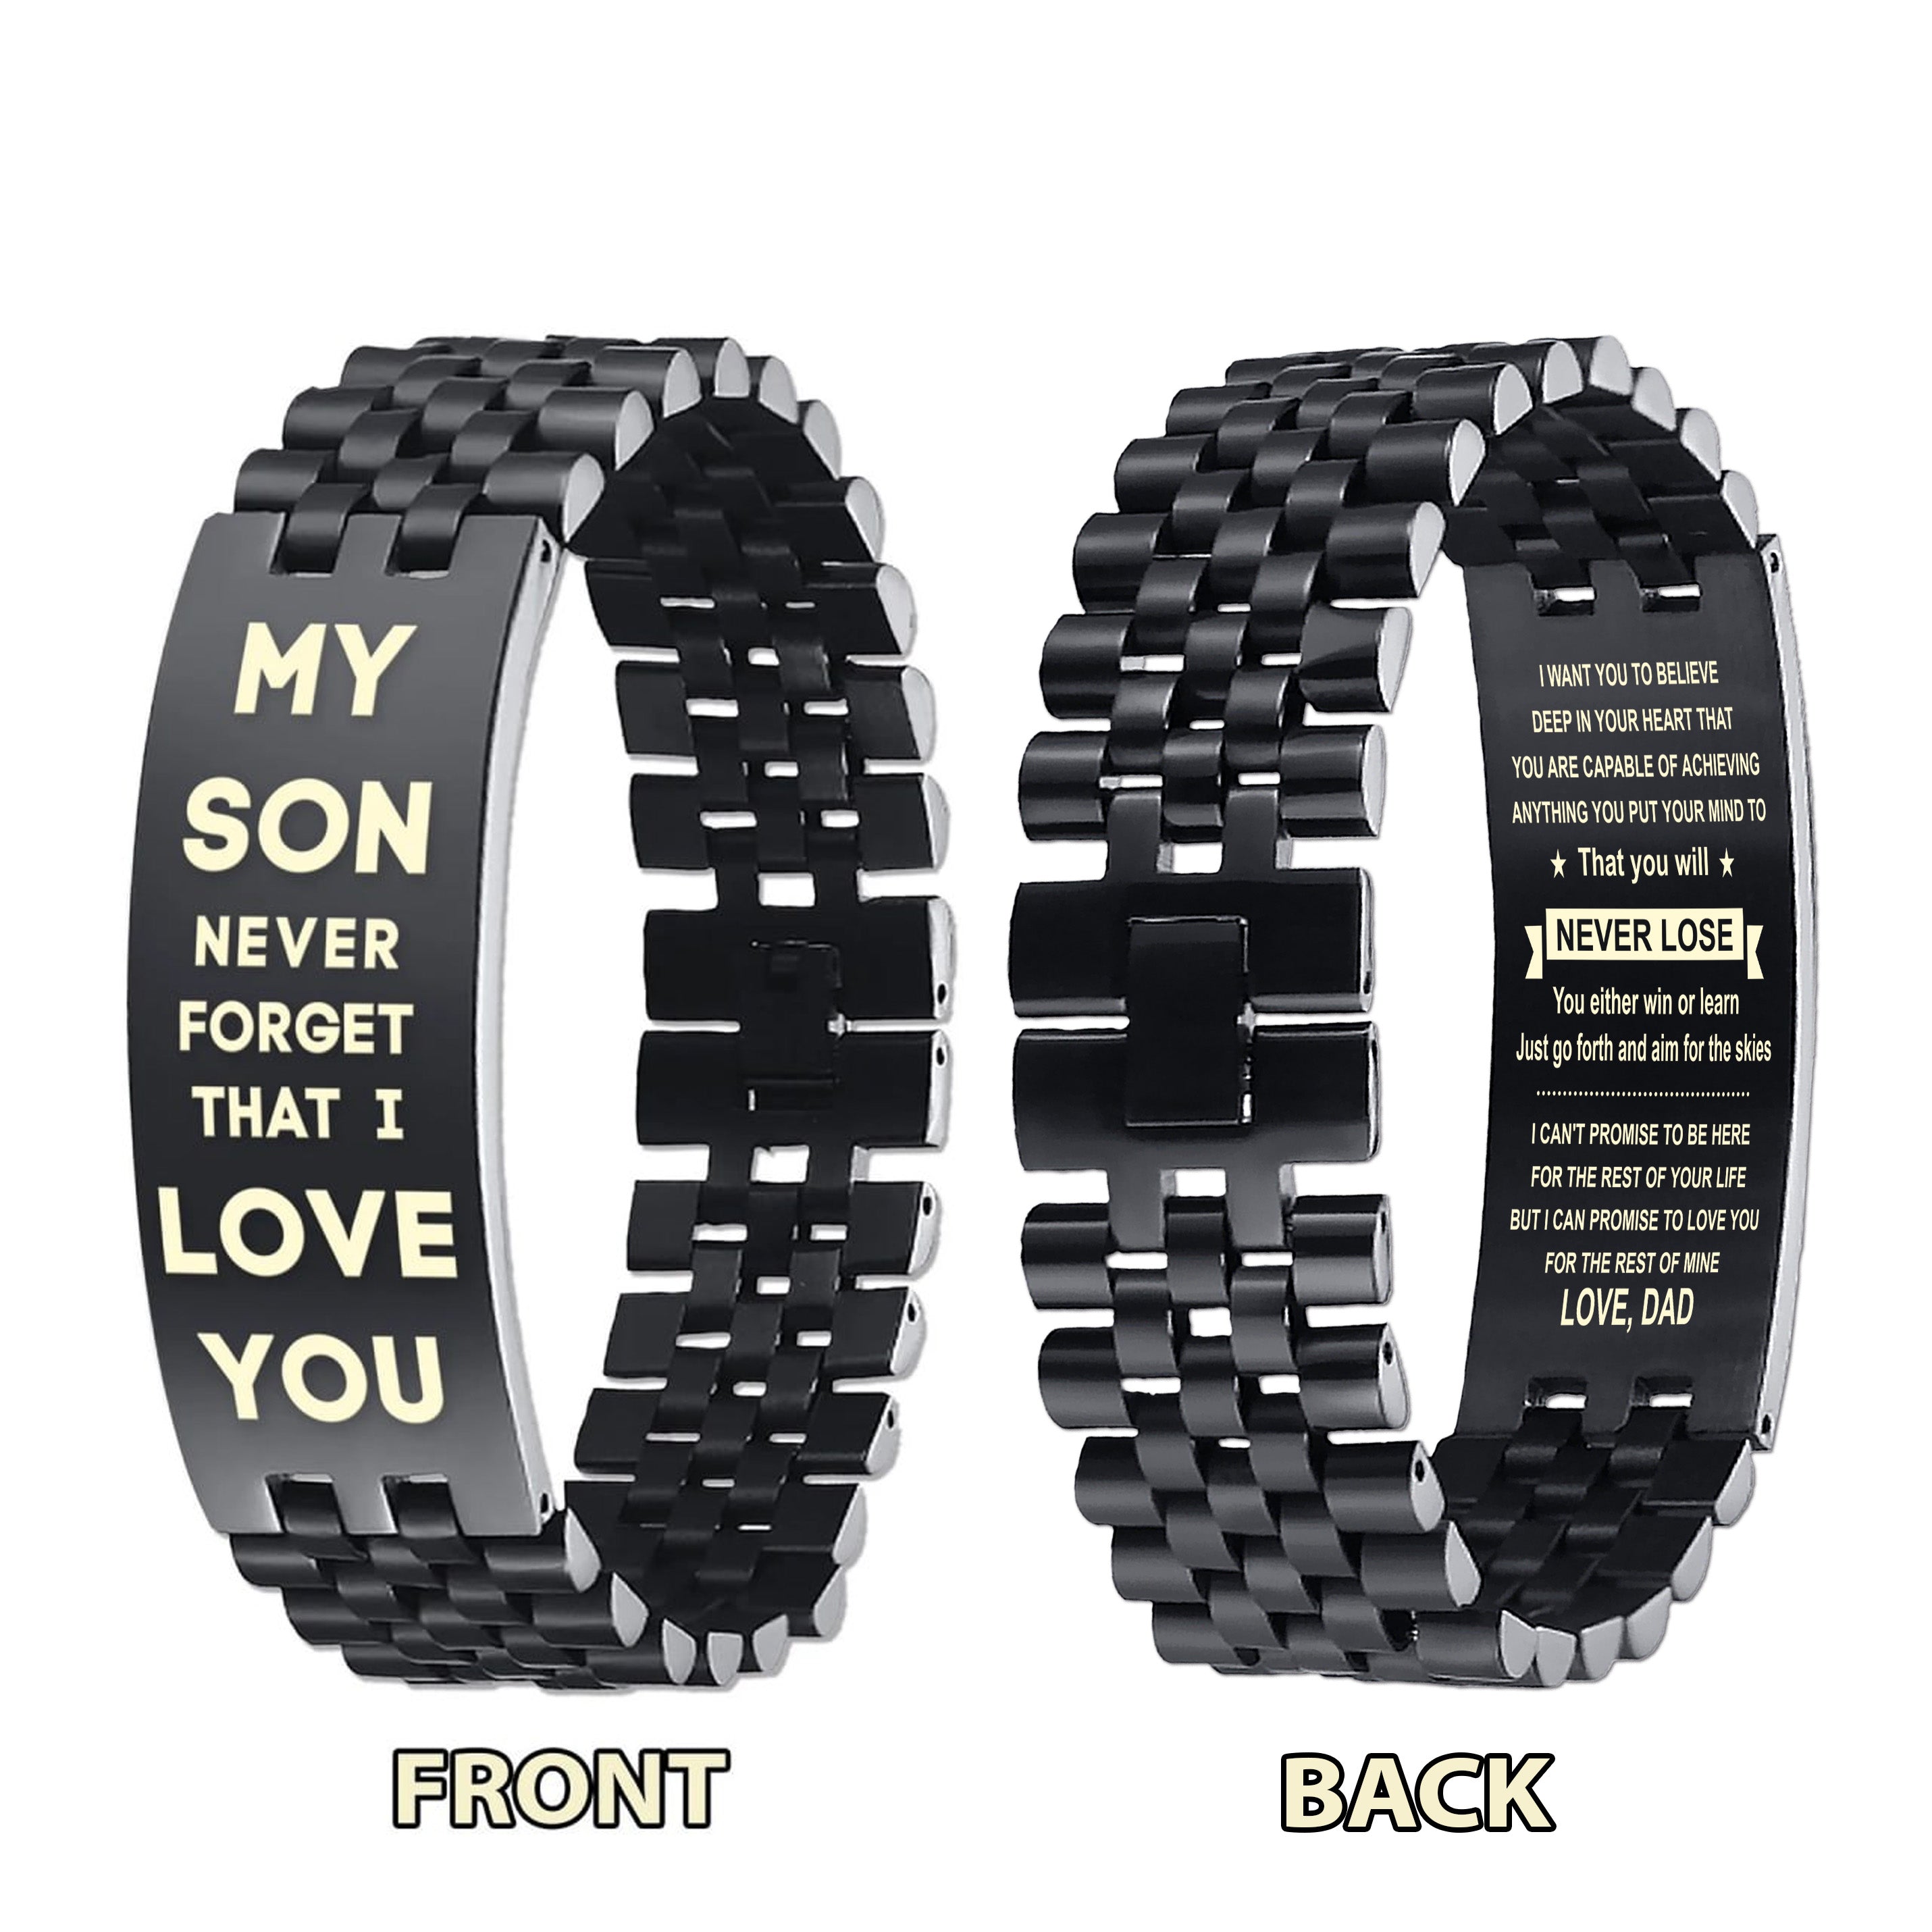 Family Bracelet Double Sided My Son Never Forget That I Love You Your Way Back Home